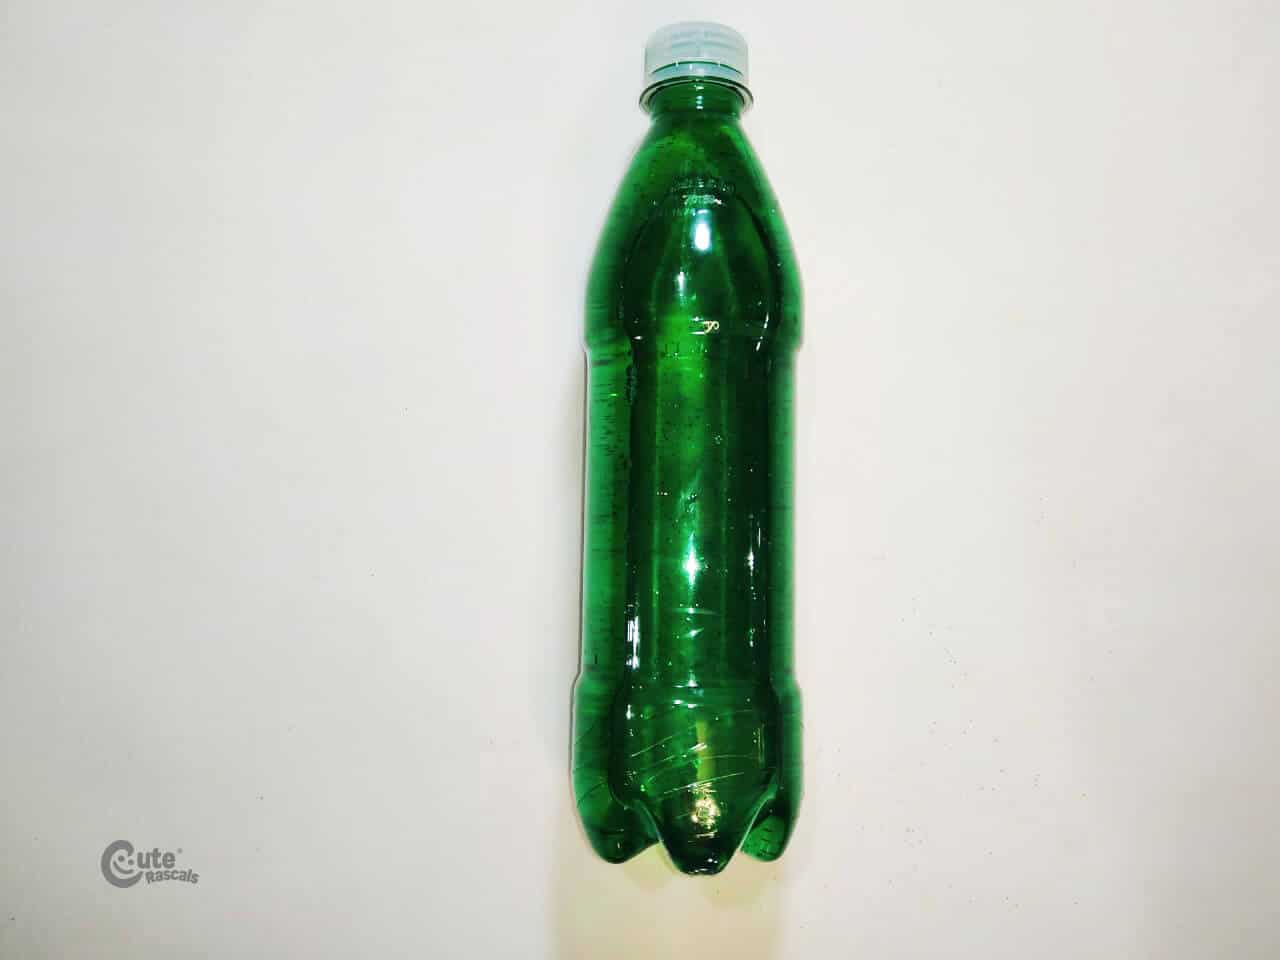  Green sensory bottle made with different materials